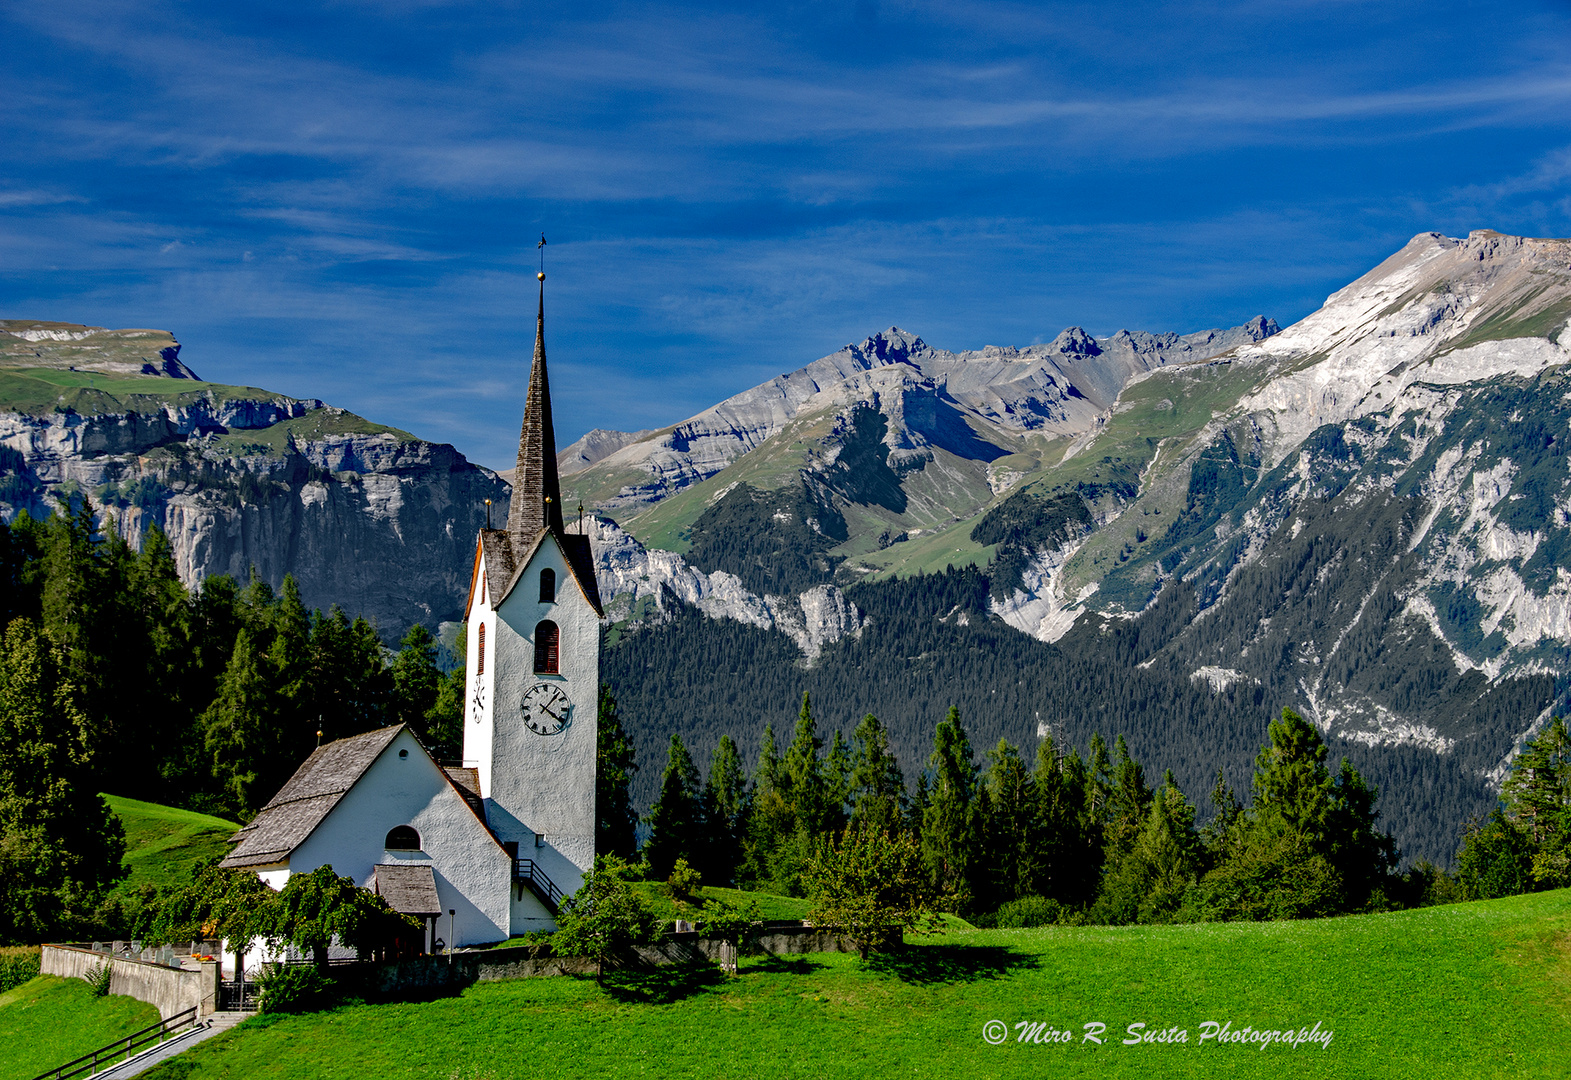 The church in the mountains